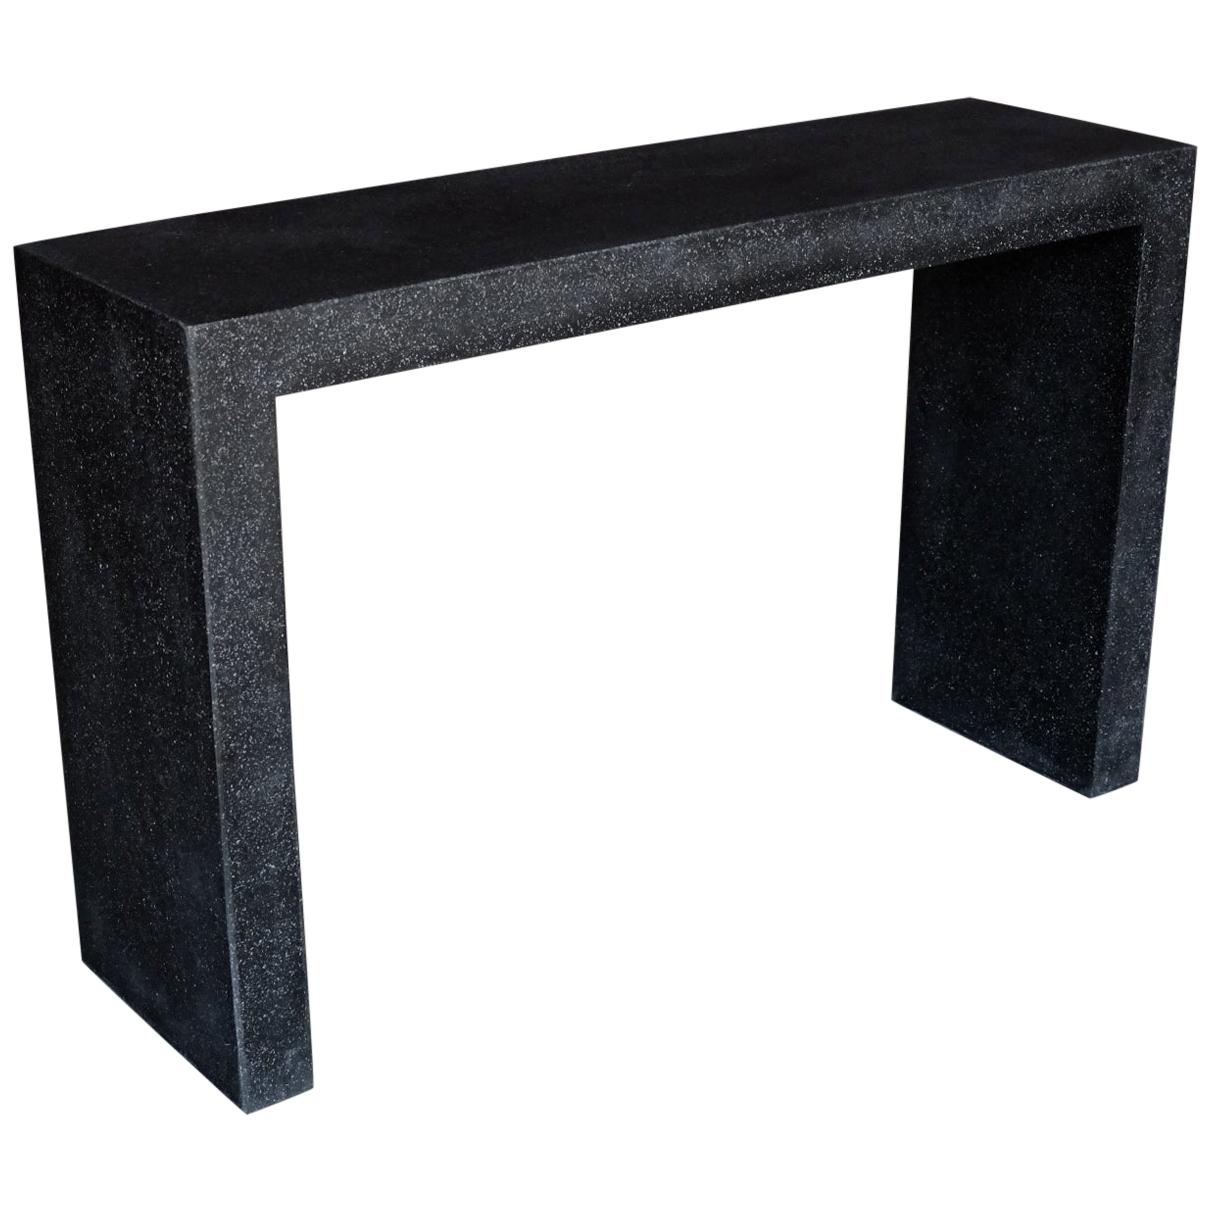 Cast Resin 'Lynne Tell' Console Table, Coal Stone Finish by Zachary A. Design For Sale